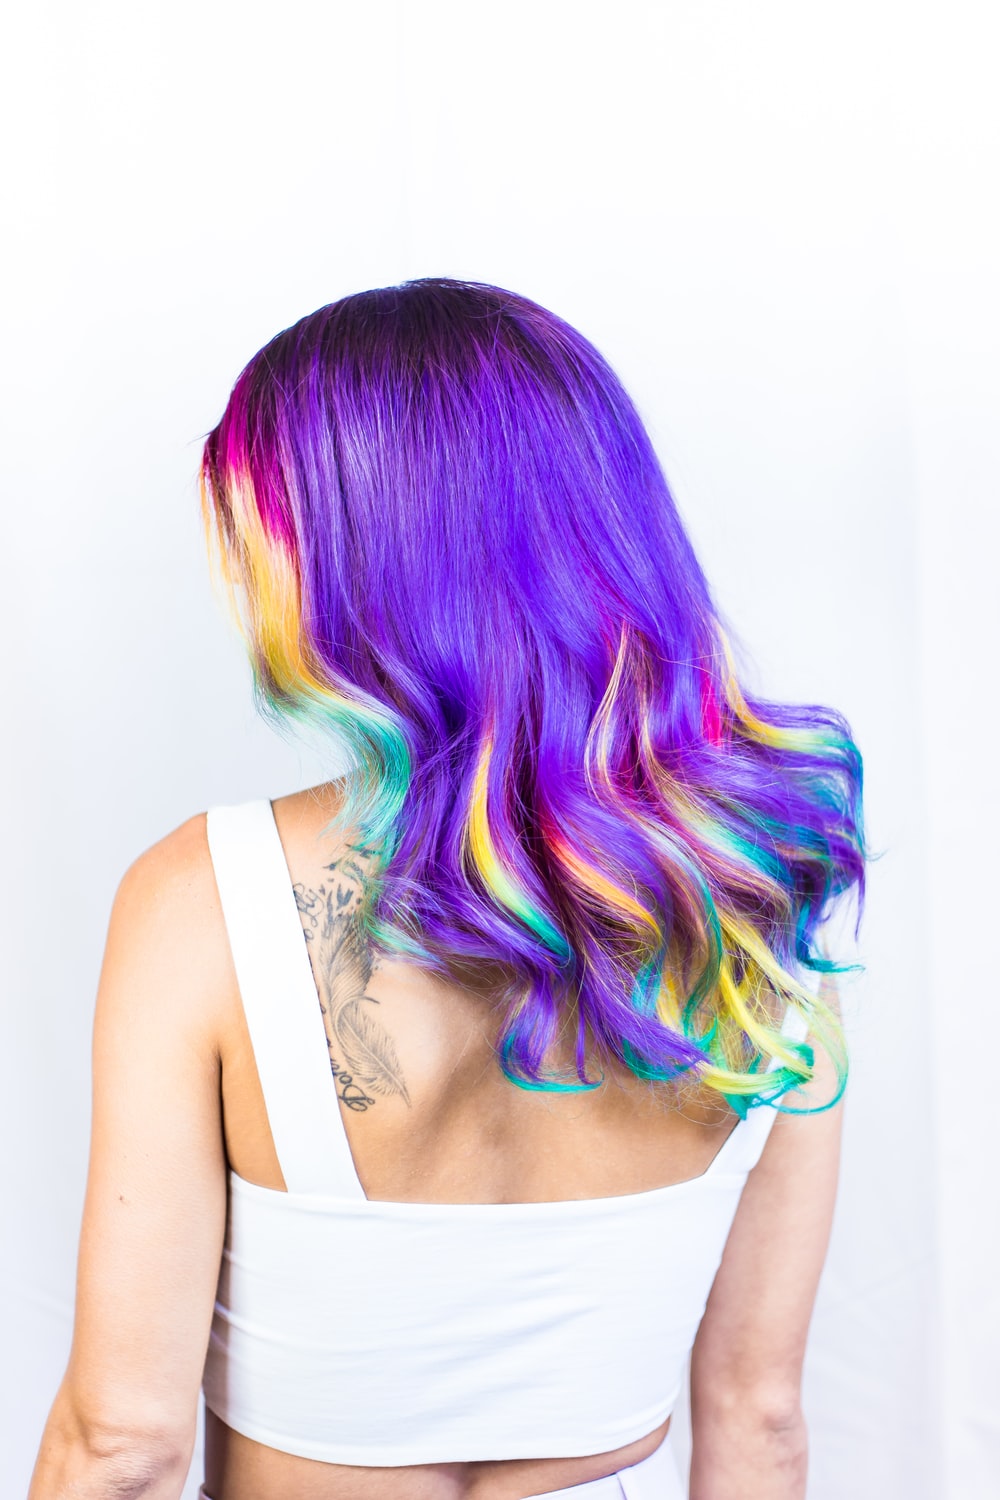 Rainbow Hair Picture. Download Free Image